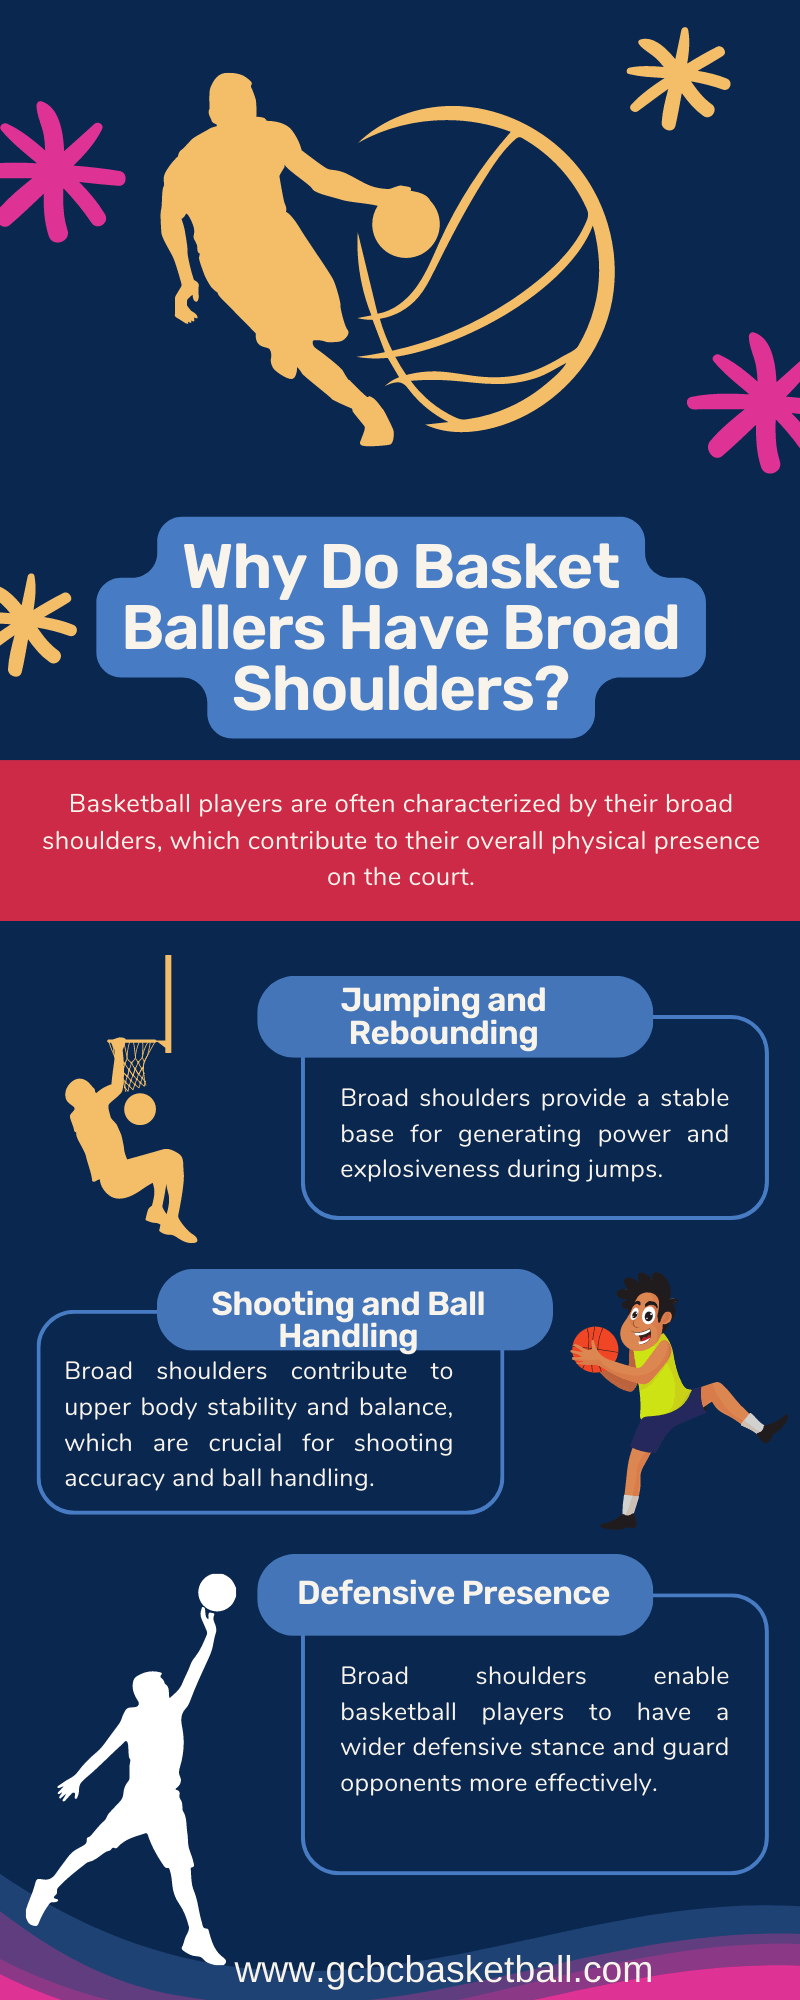 Why Basketball Players Have Broad Shoulders?